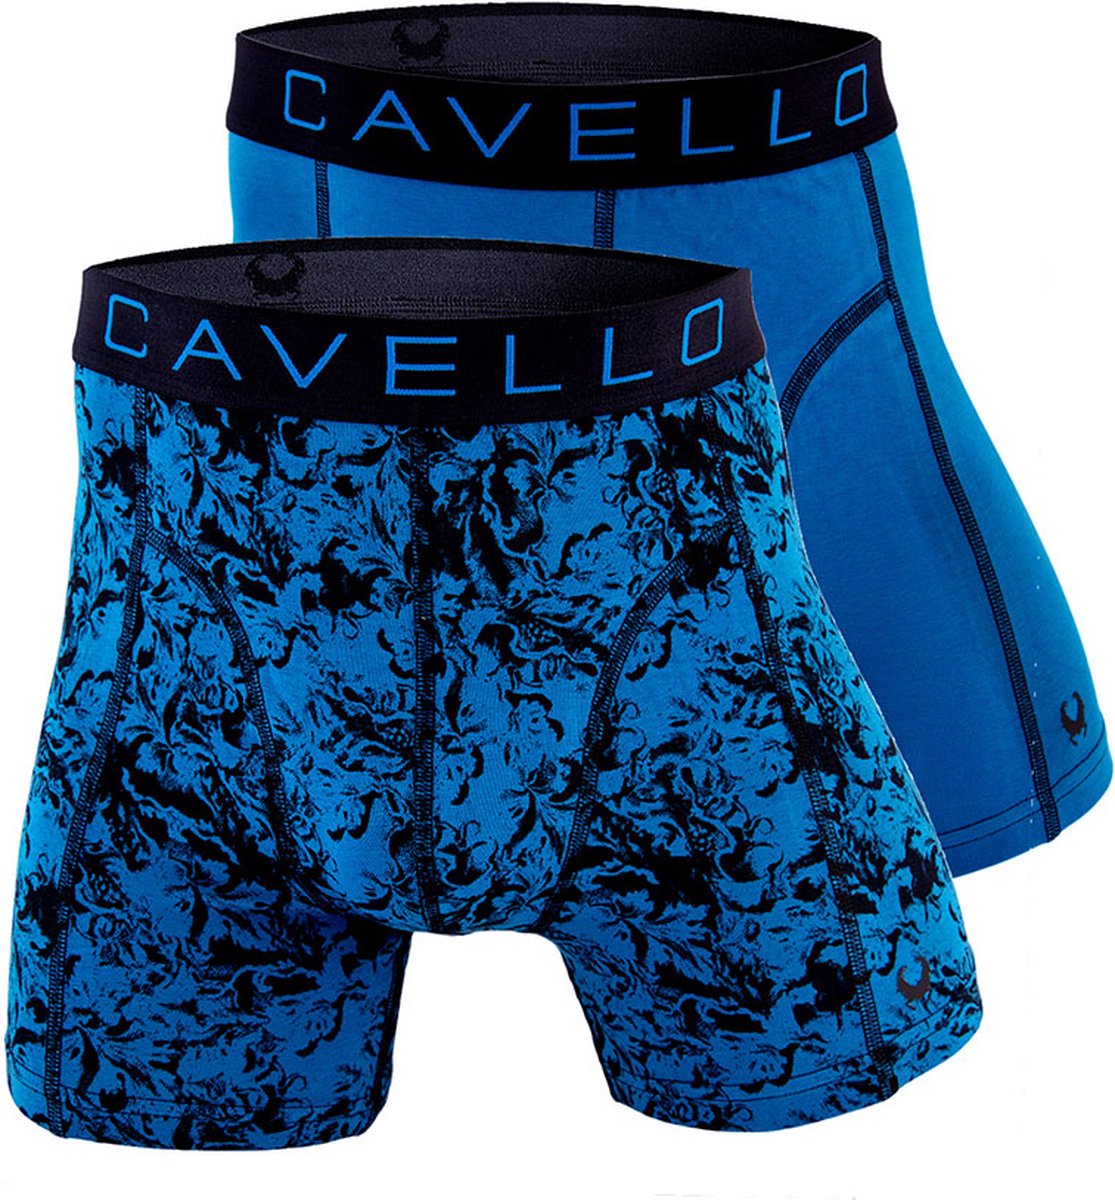 Cavello Boxershorts 2-pack Billy Jeans